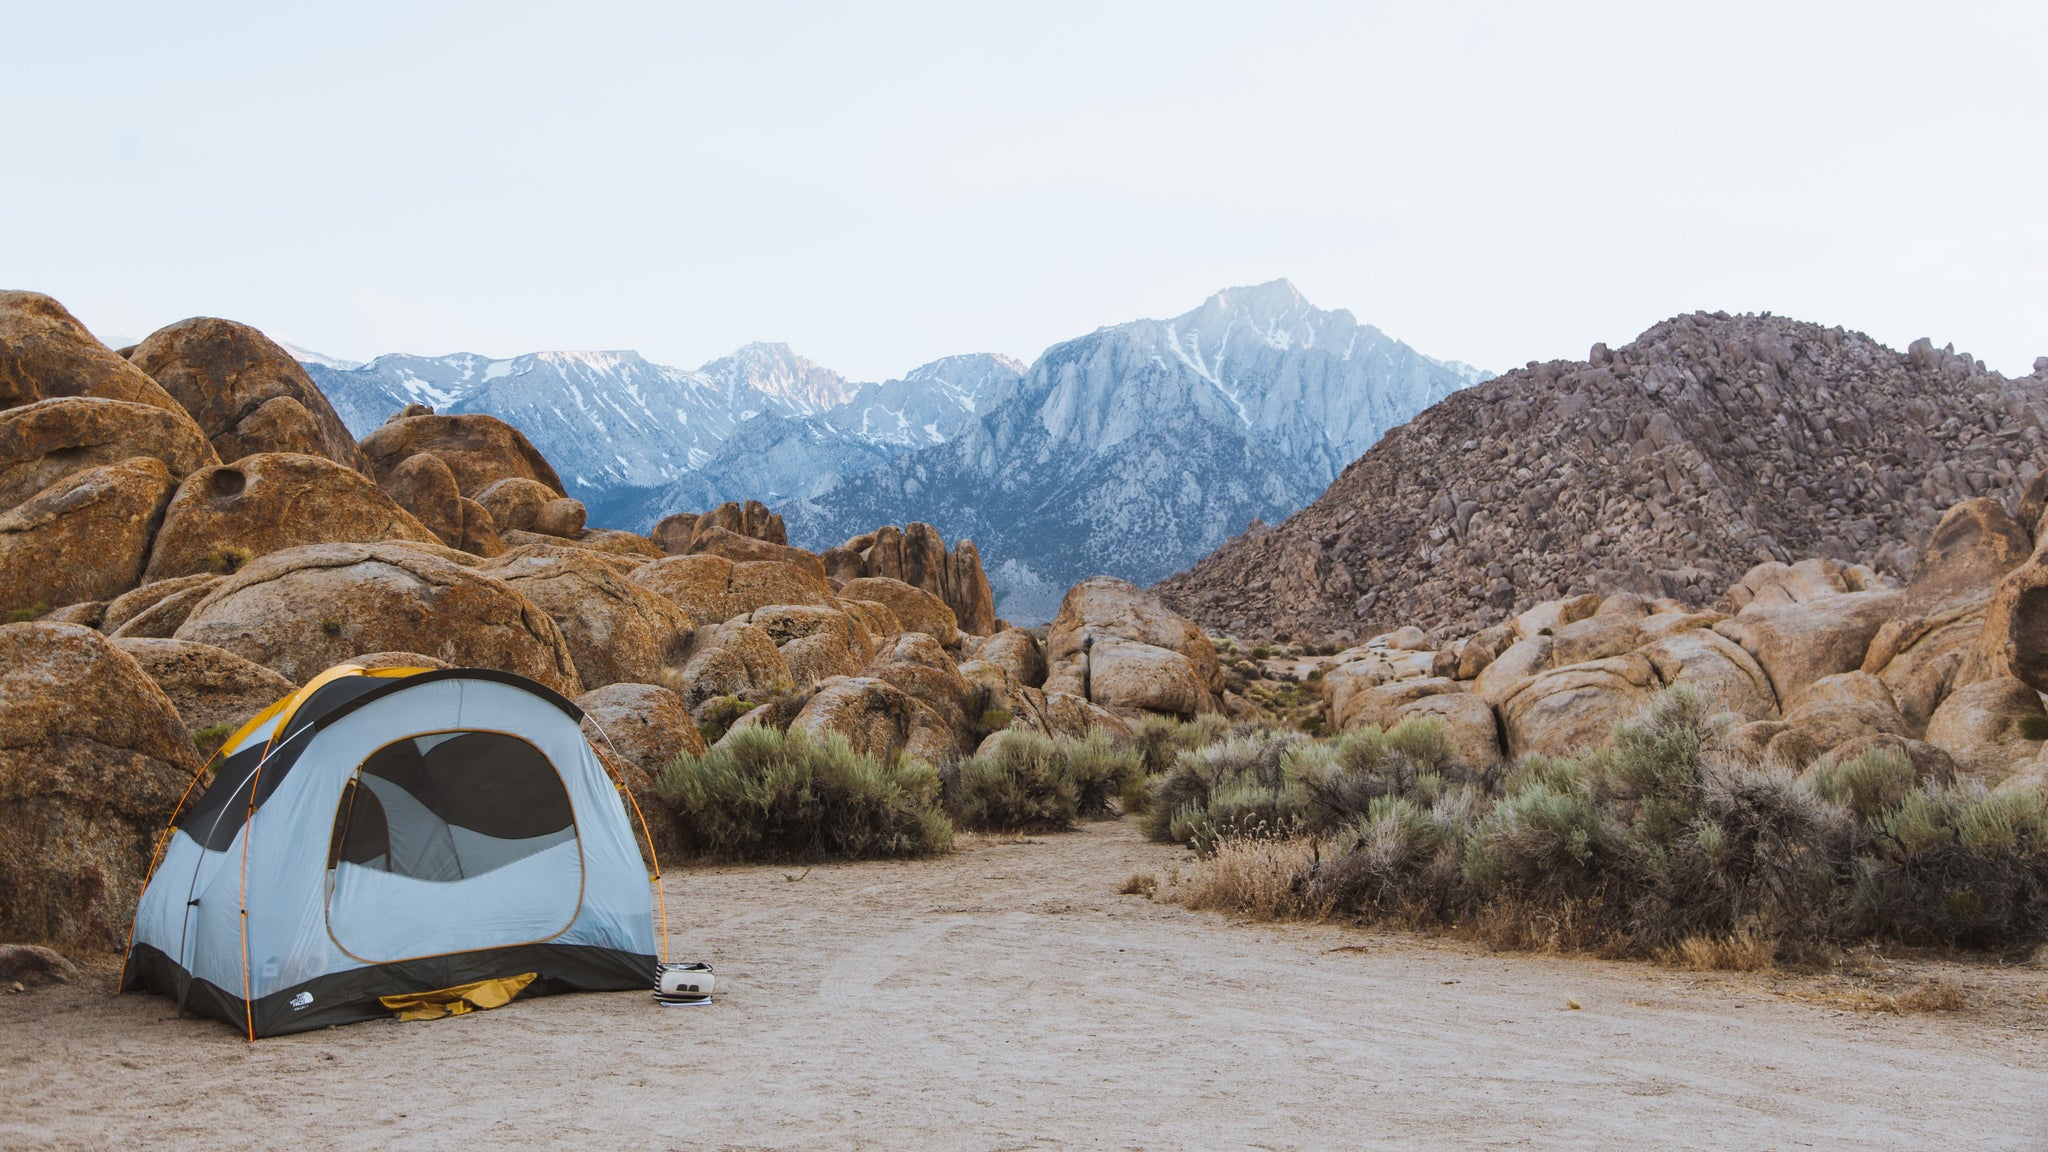 Tent camping in a sandy desert valley 